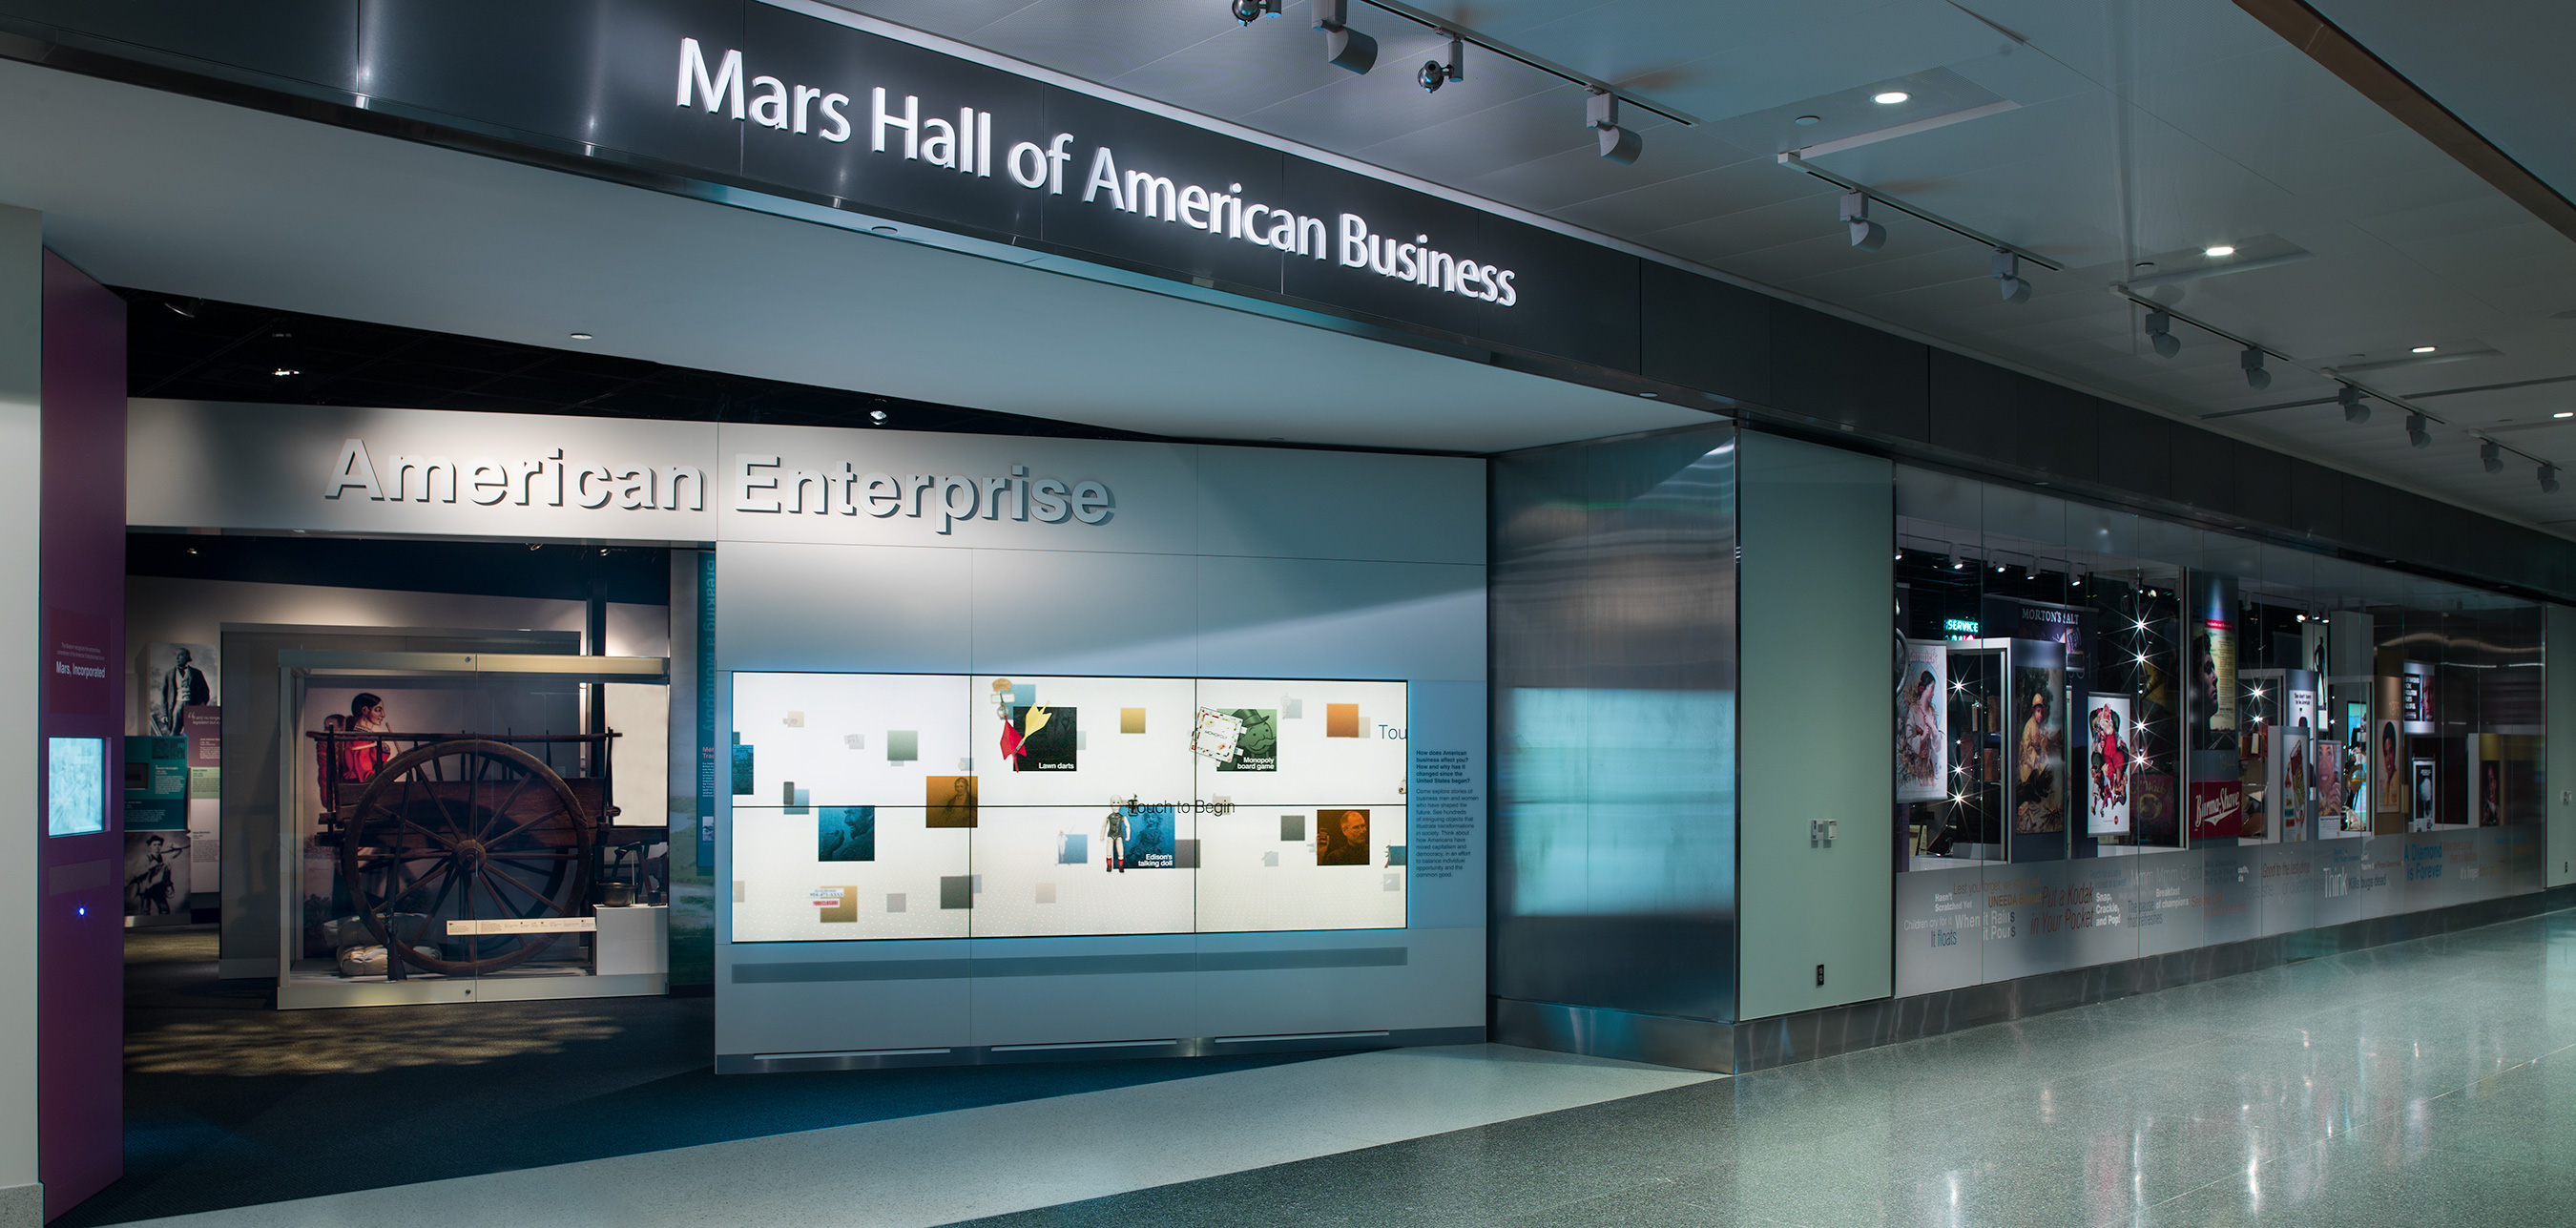 Entrance to American Enterprise in the Mars Hall of American Business